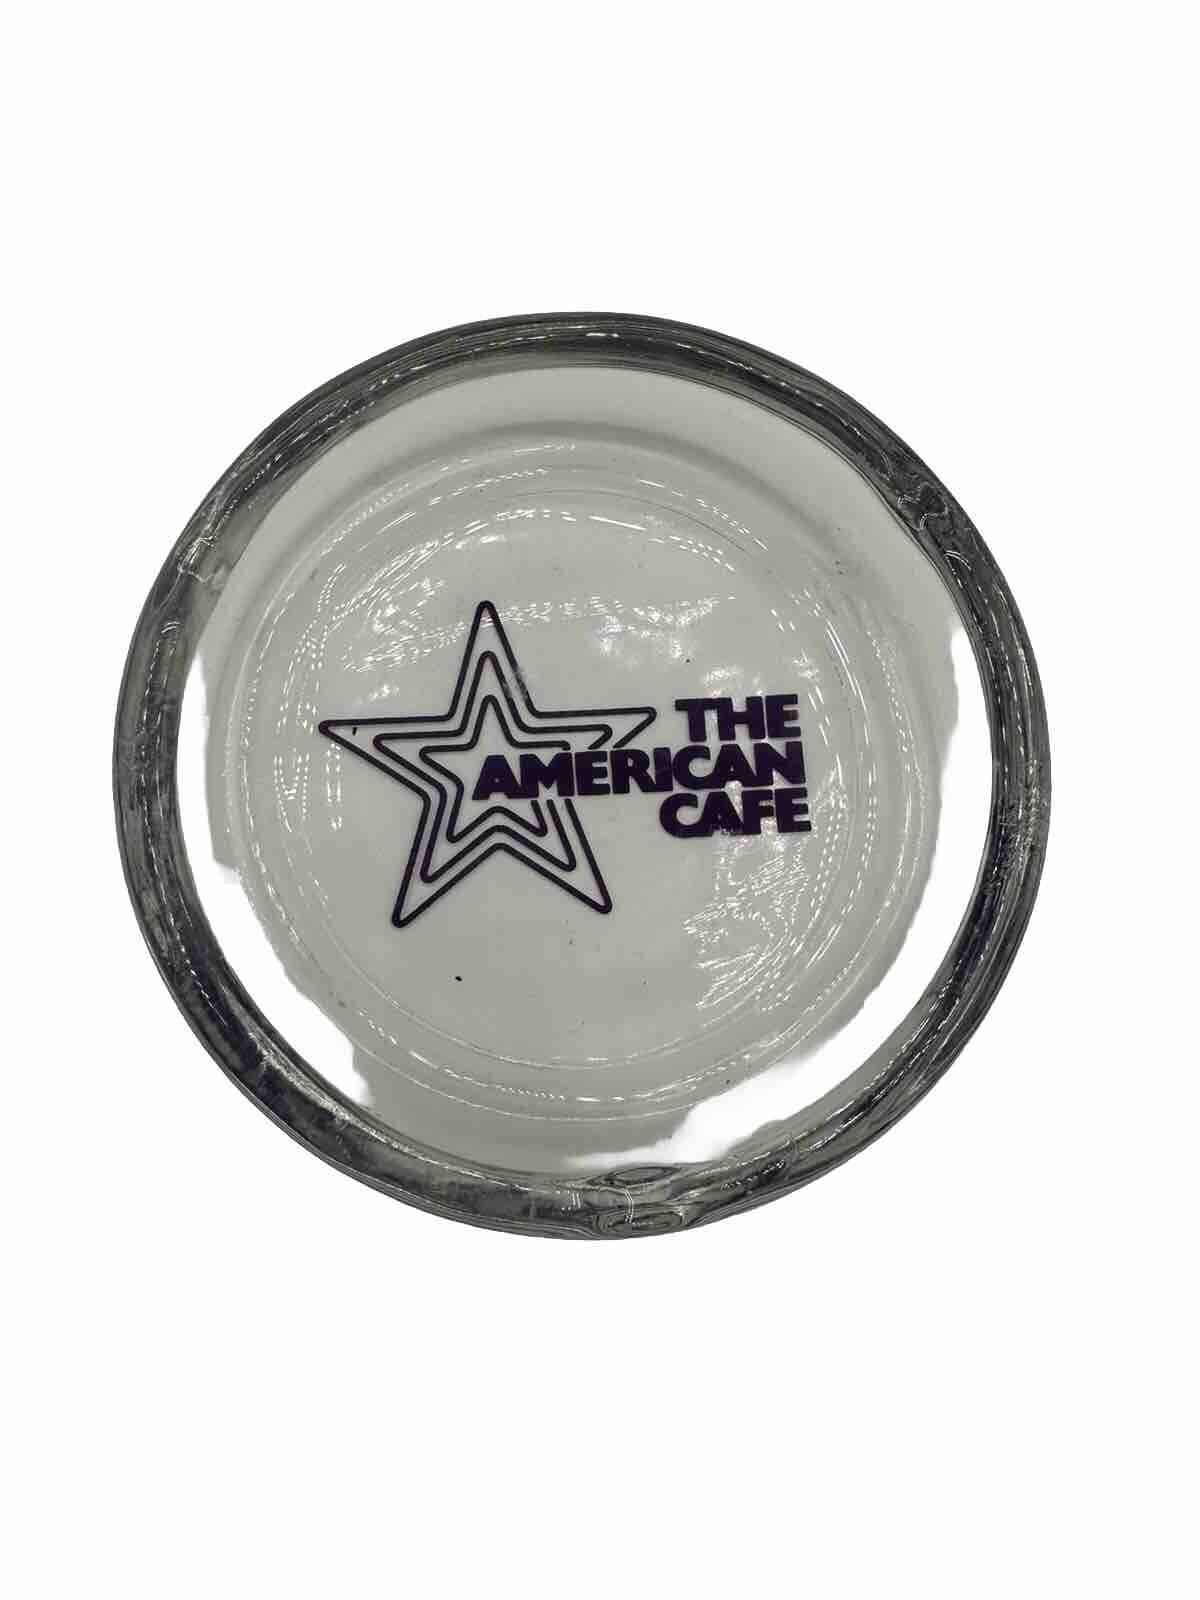 Vintage Ashtray From The American Cafe Glass Cigarette